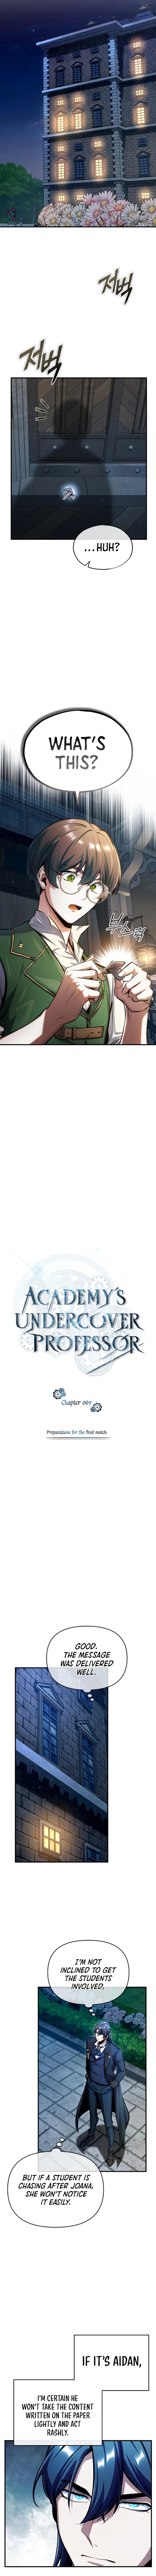 Academy’s Undercover Professor - Chapter 67 Page 6